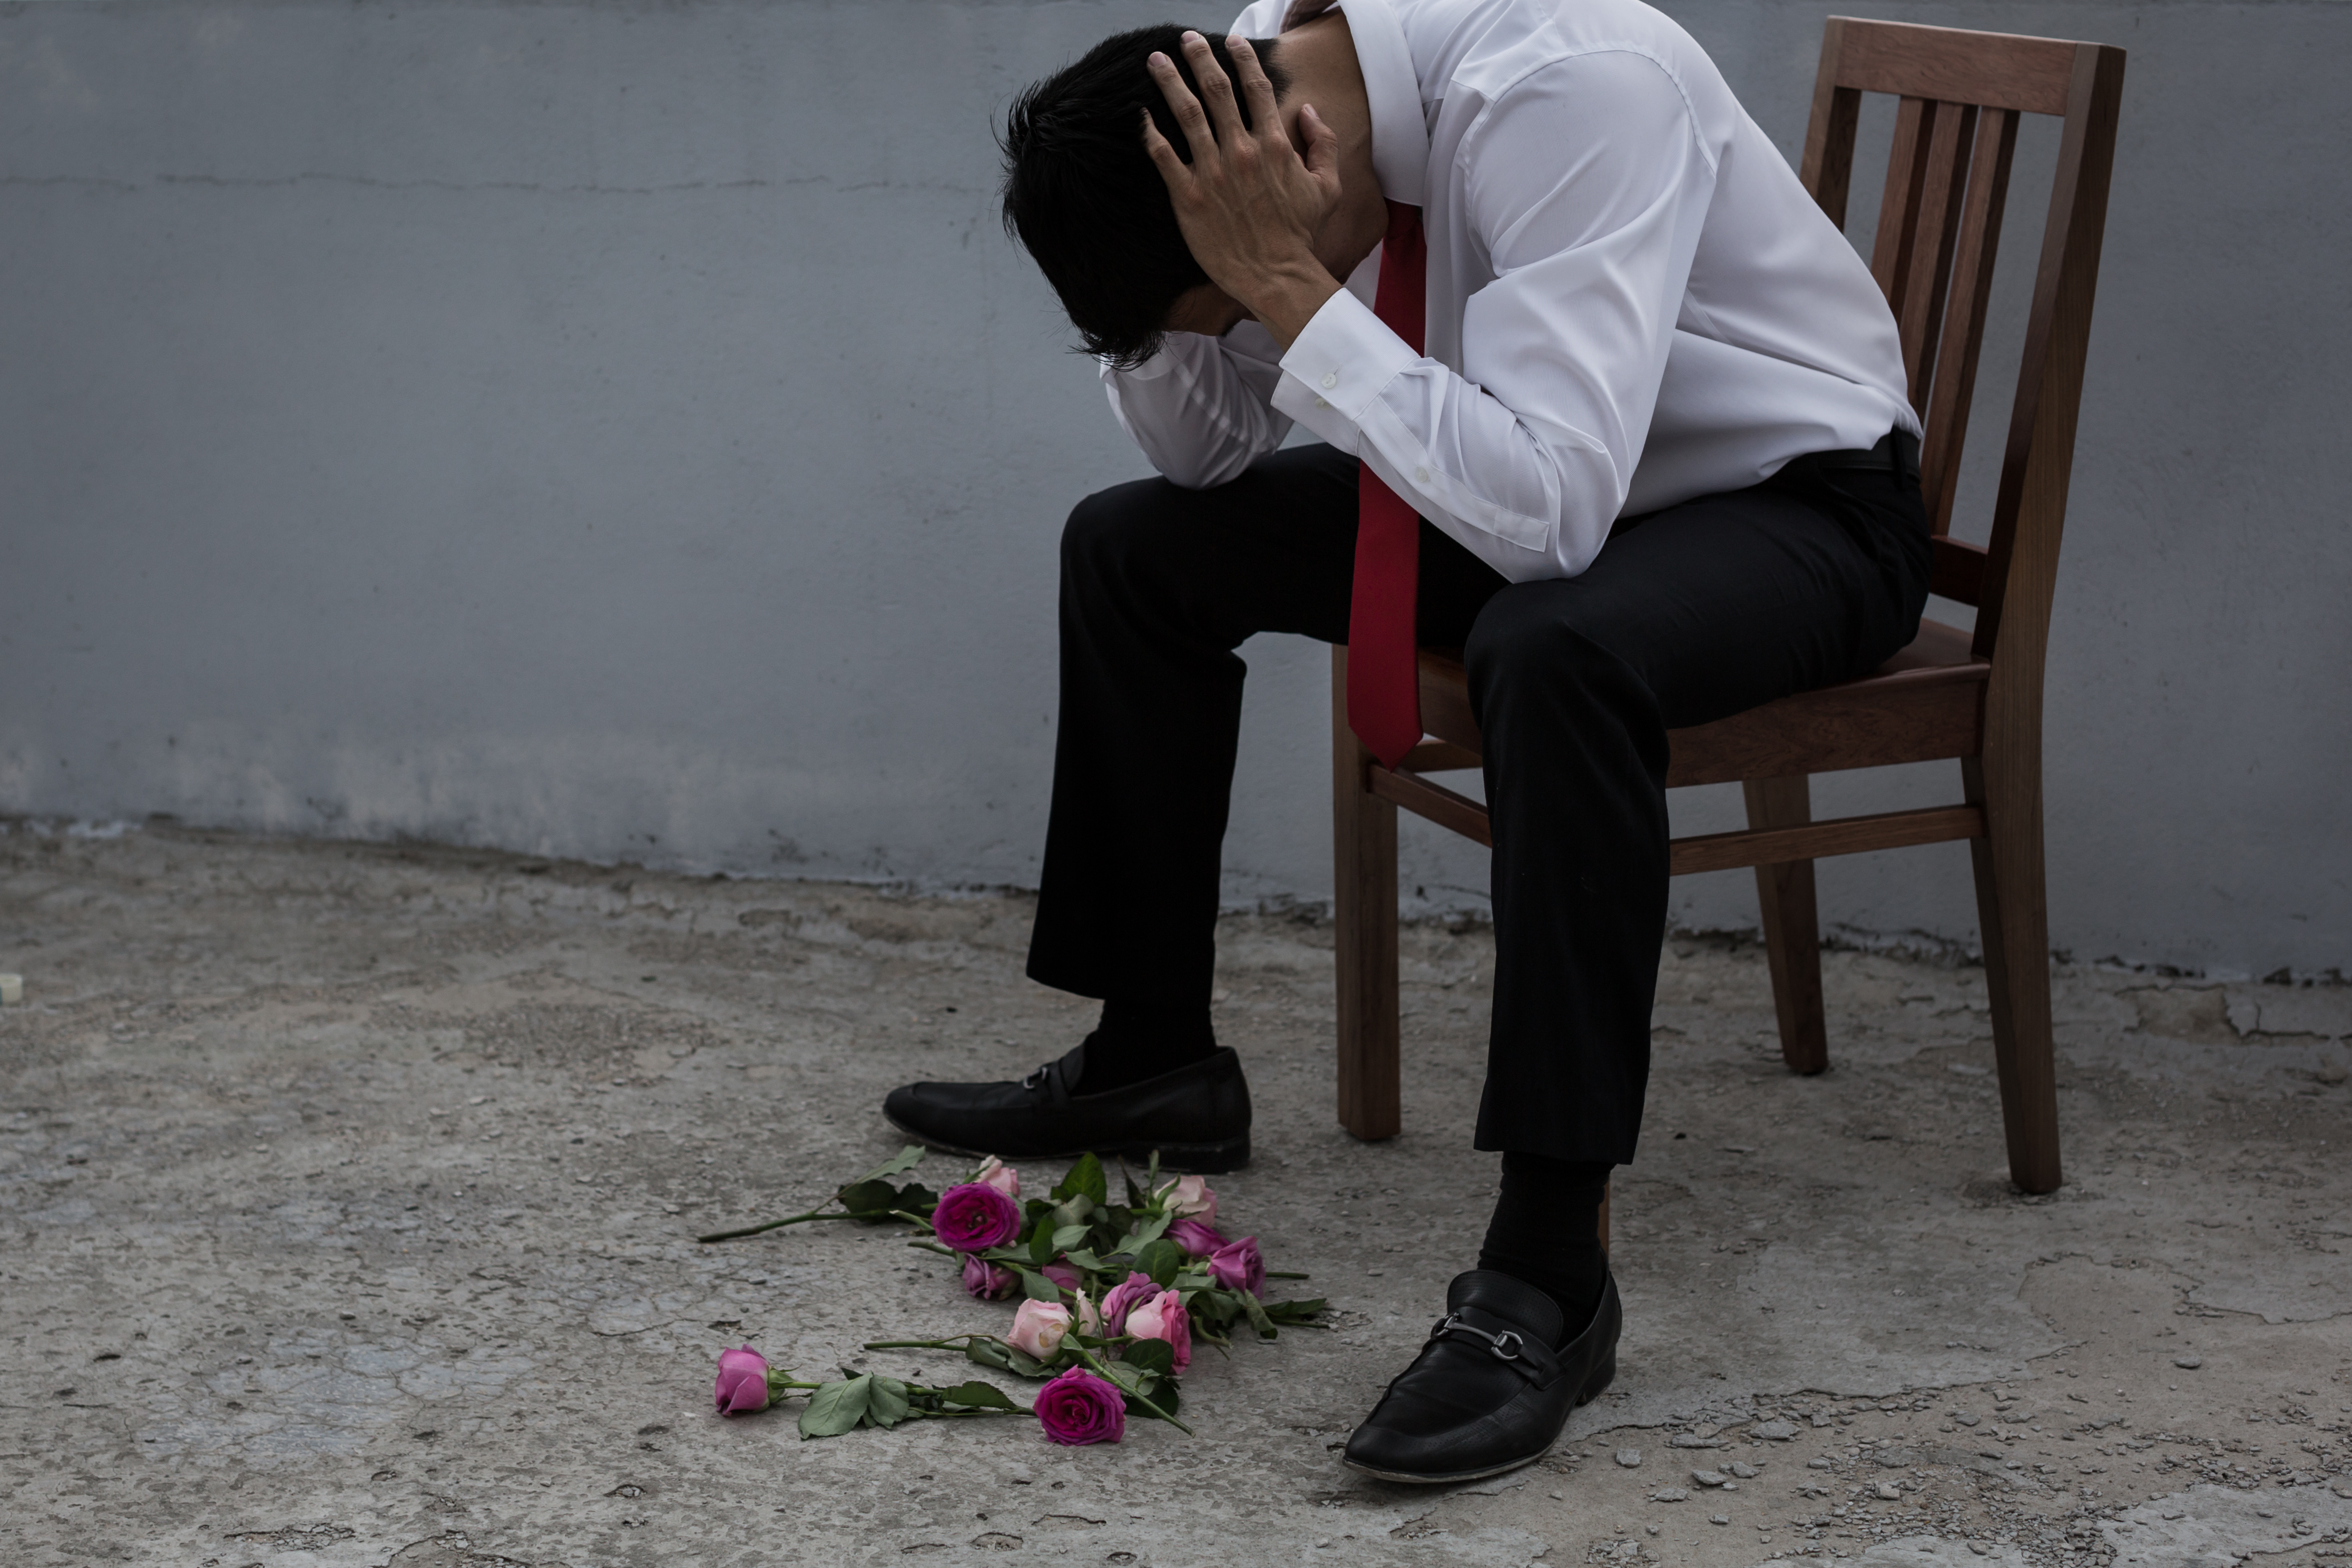 A man looking sad with flowers scattered on the ground | Source: Shutterstock